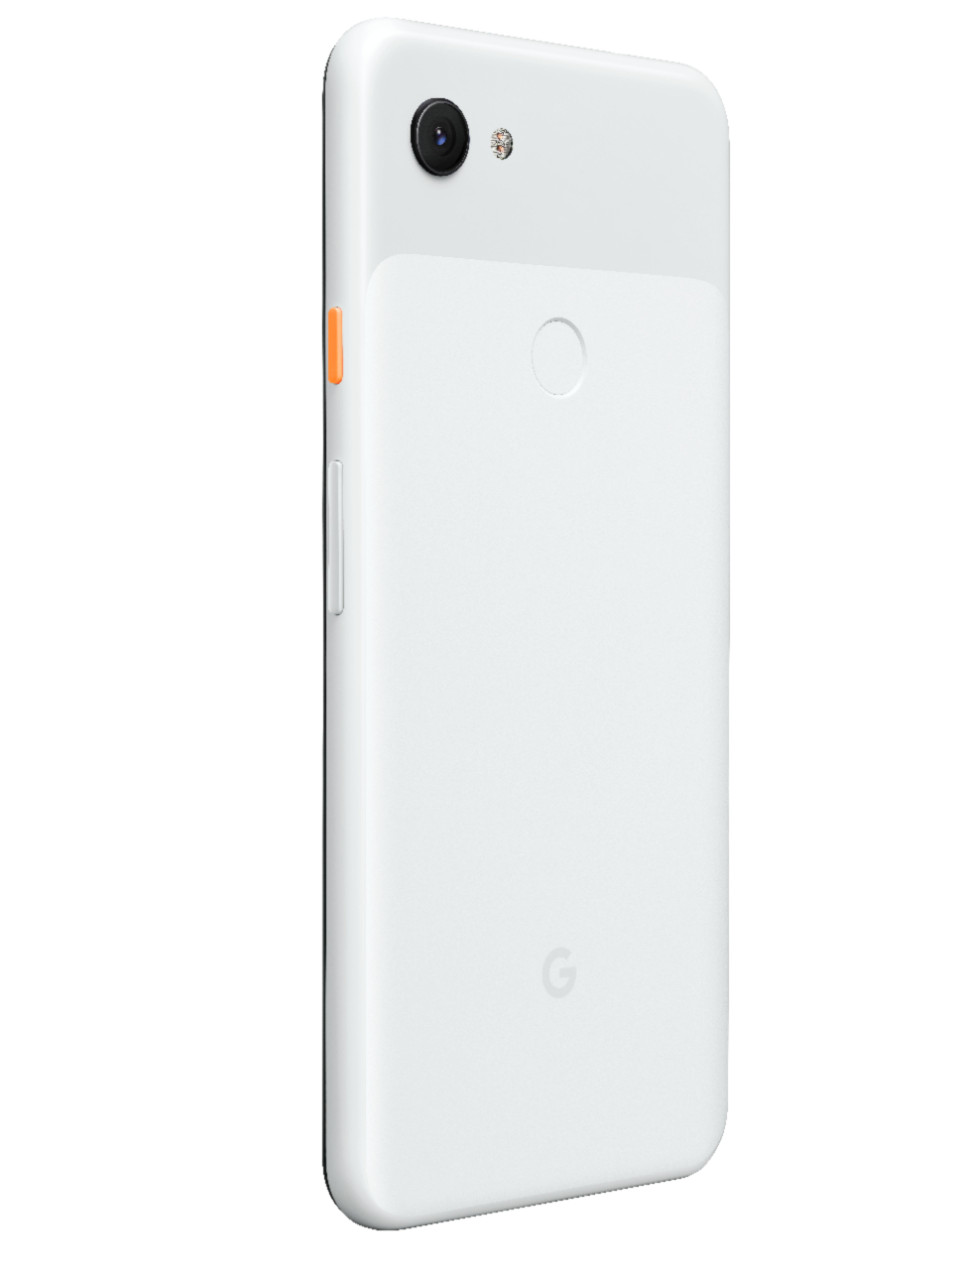 Google - Geek Squad Certified Refurbished Pixel 3a XL - 64GB (Unlocked) - Clearly White